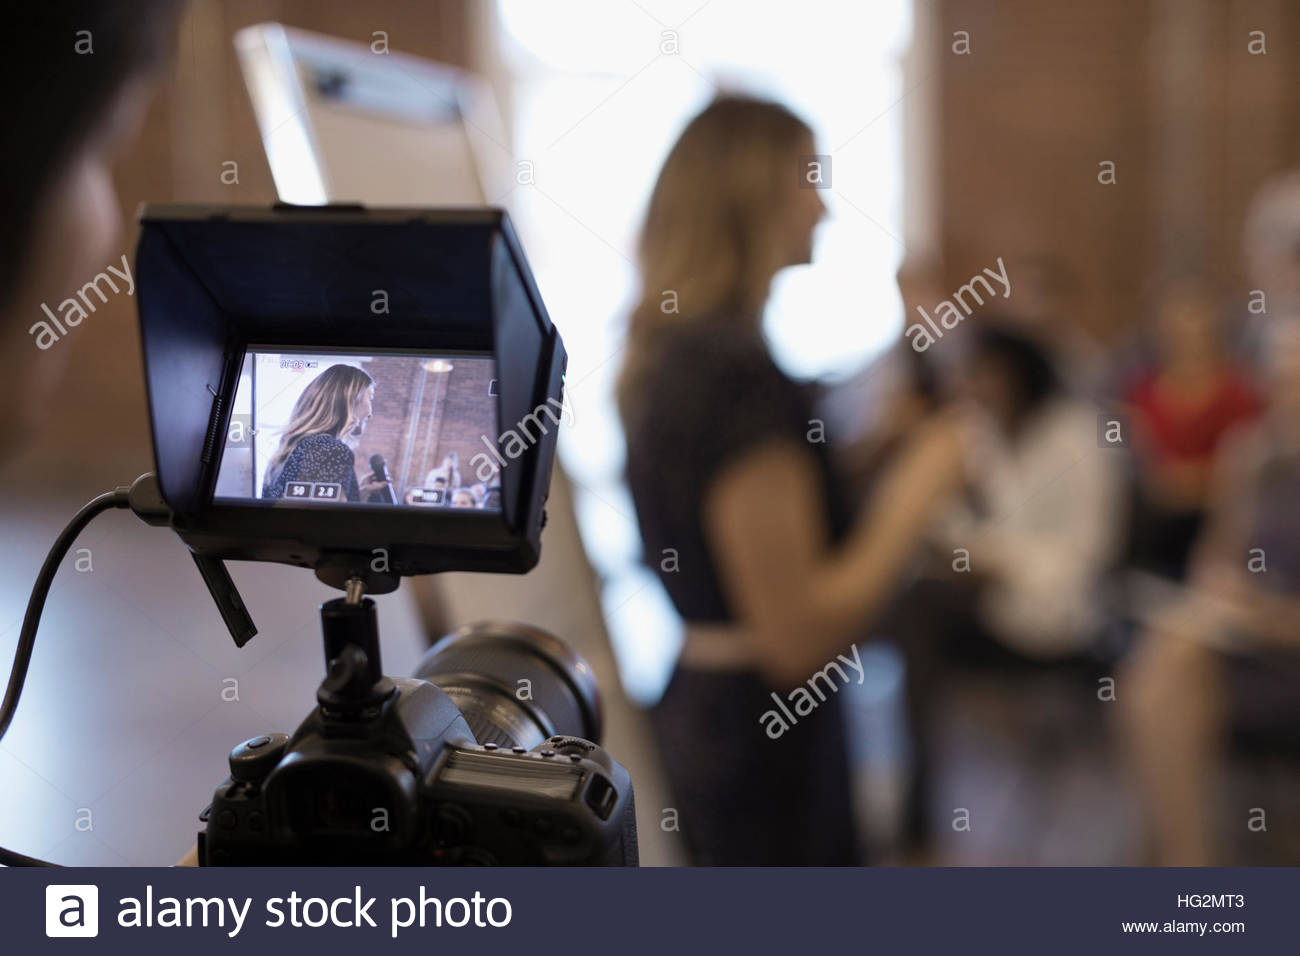 Digital viewfinder videoing of businesswoman leading conference meeting Stock Photo